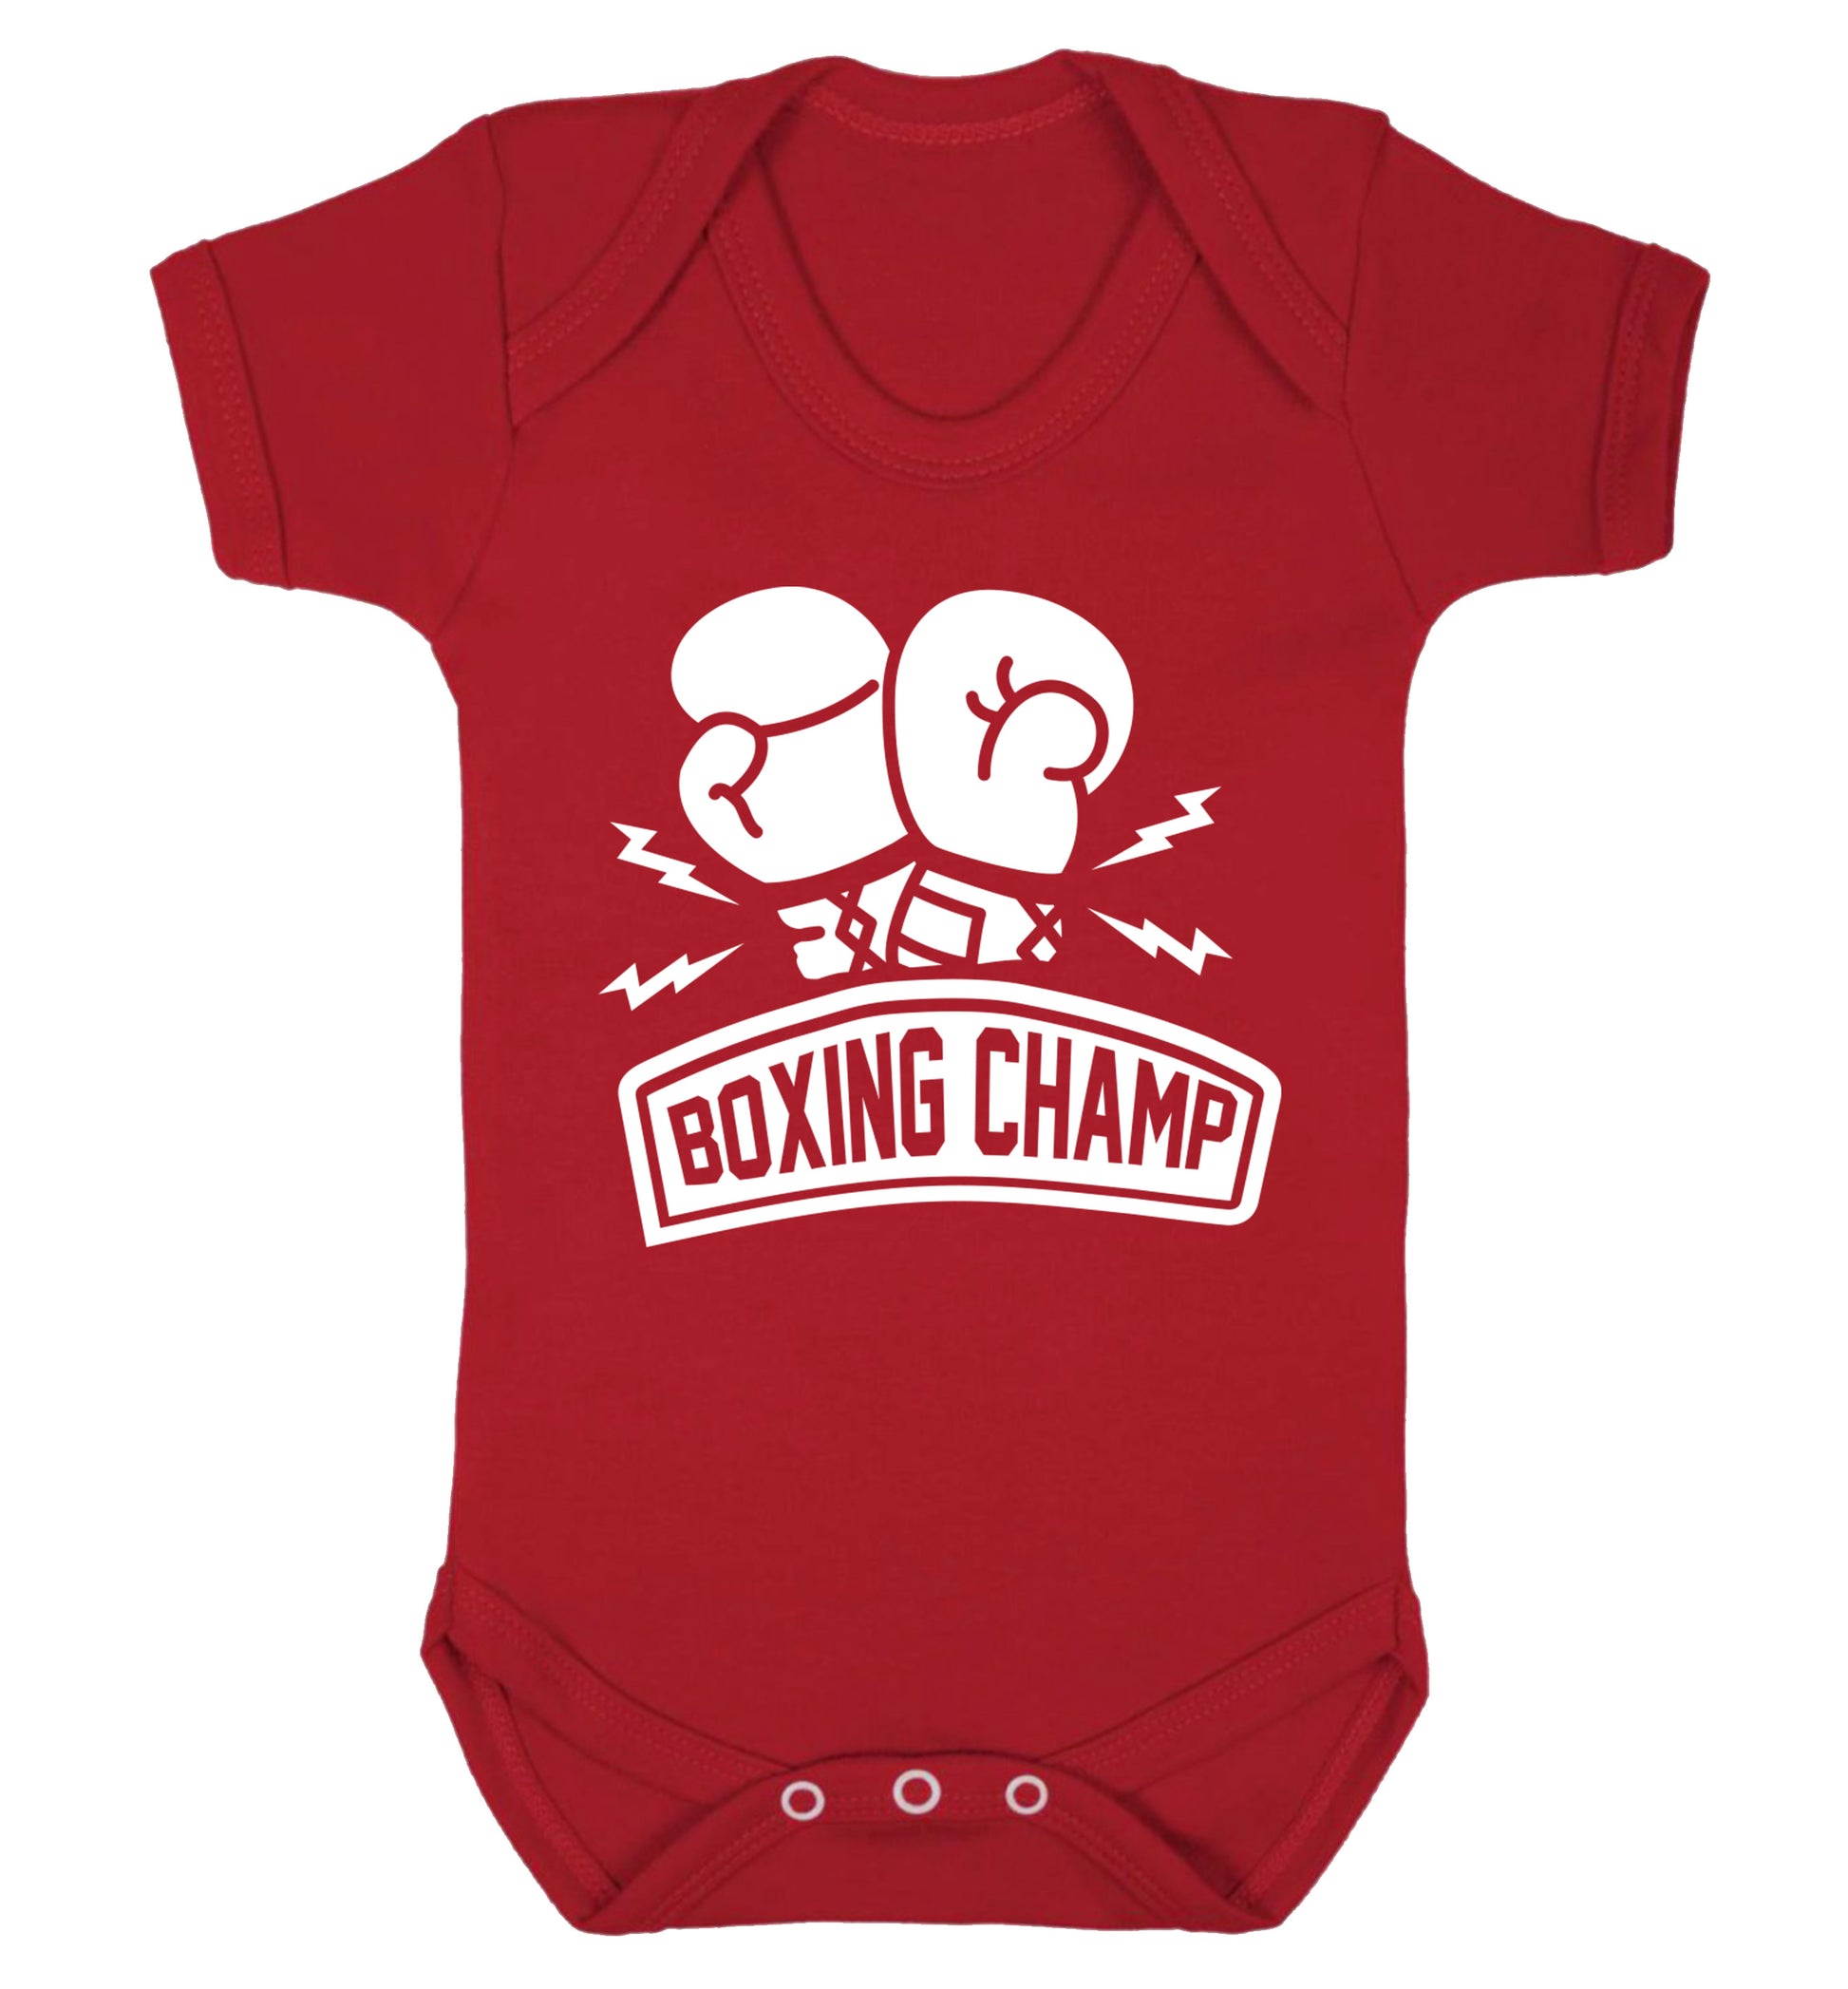 Boxing Champ Baby Vest red 18-24 months